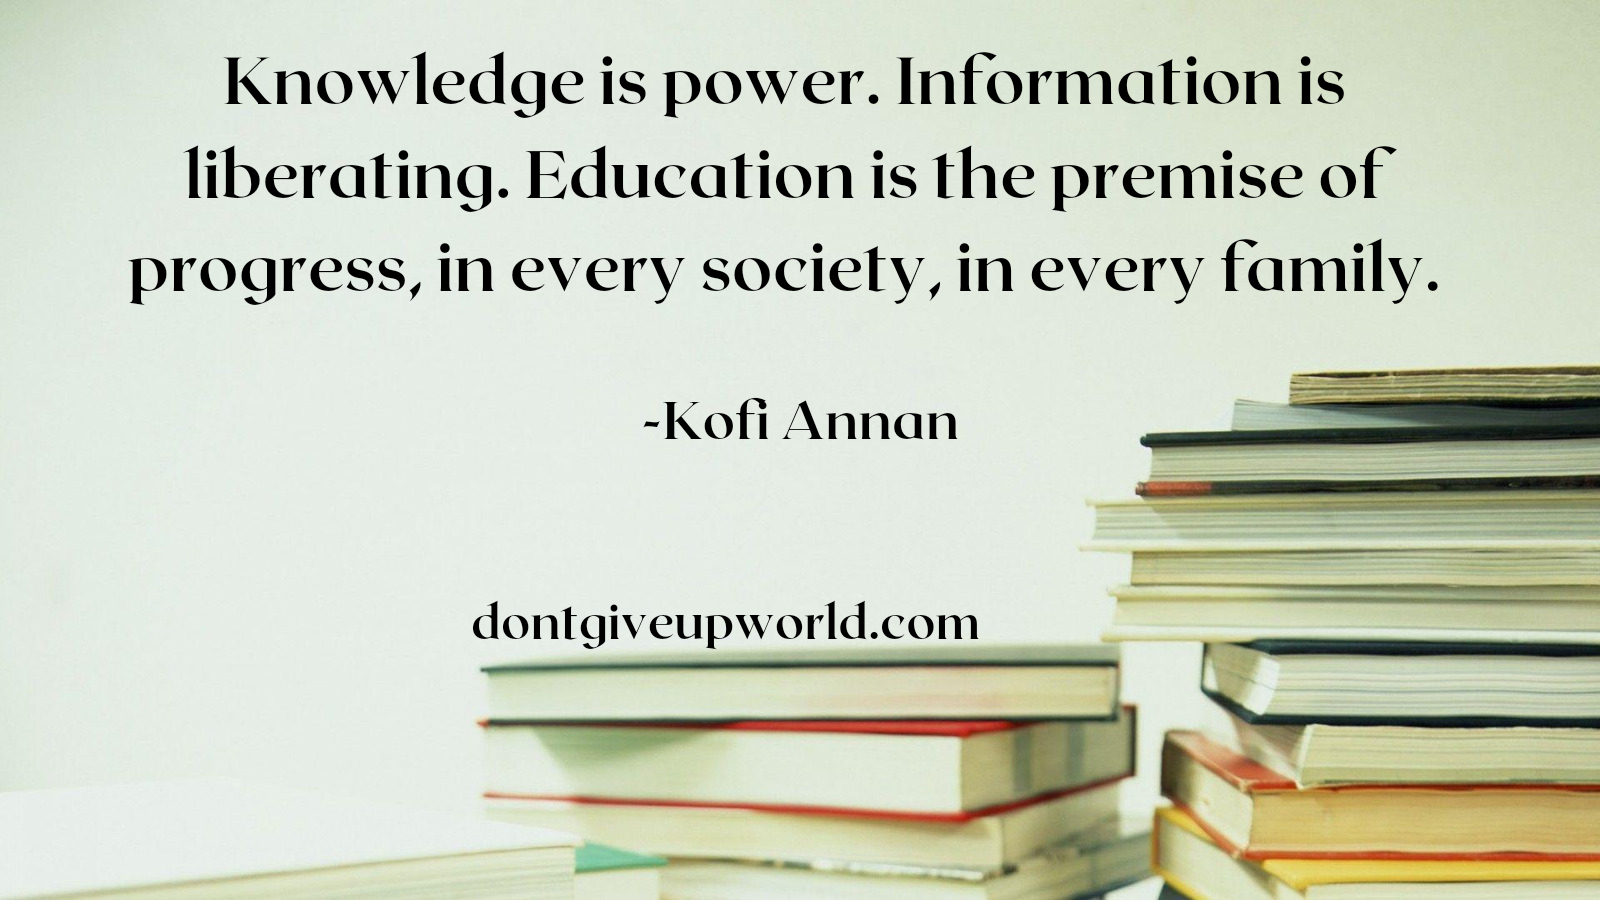 Quote on Knowledge is power by Kofi Annan - Dont Give Up World